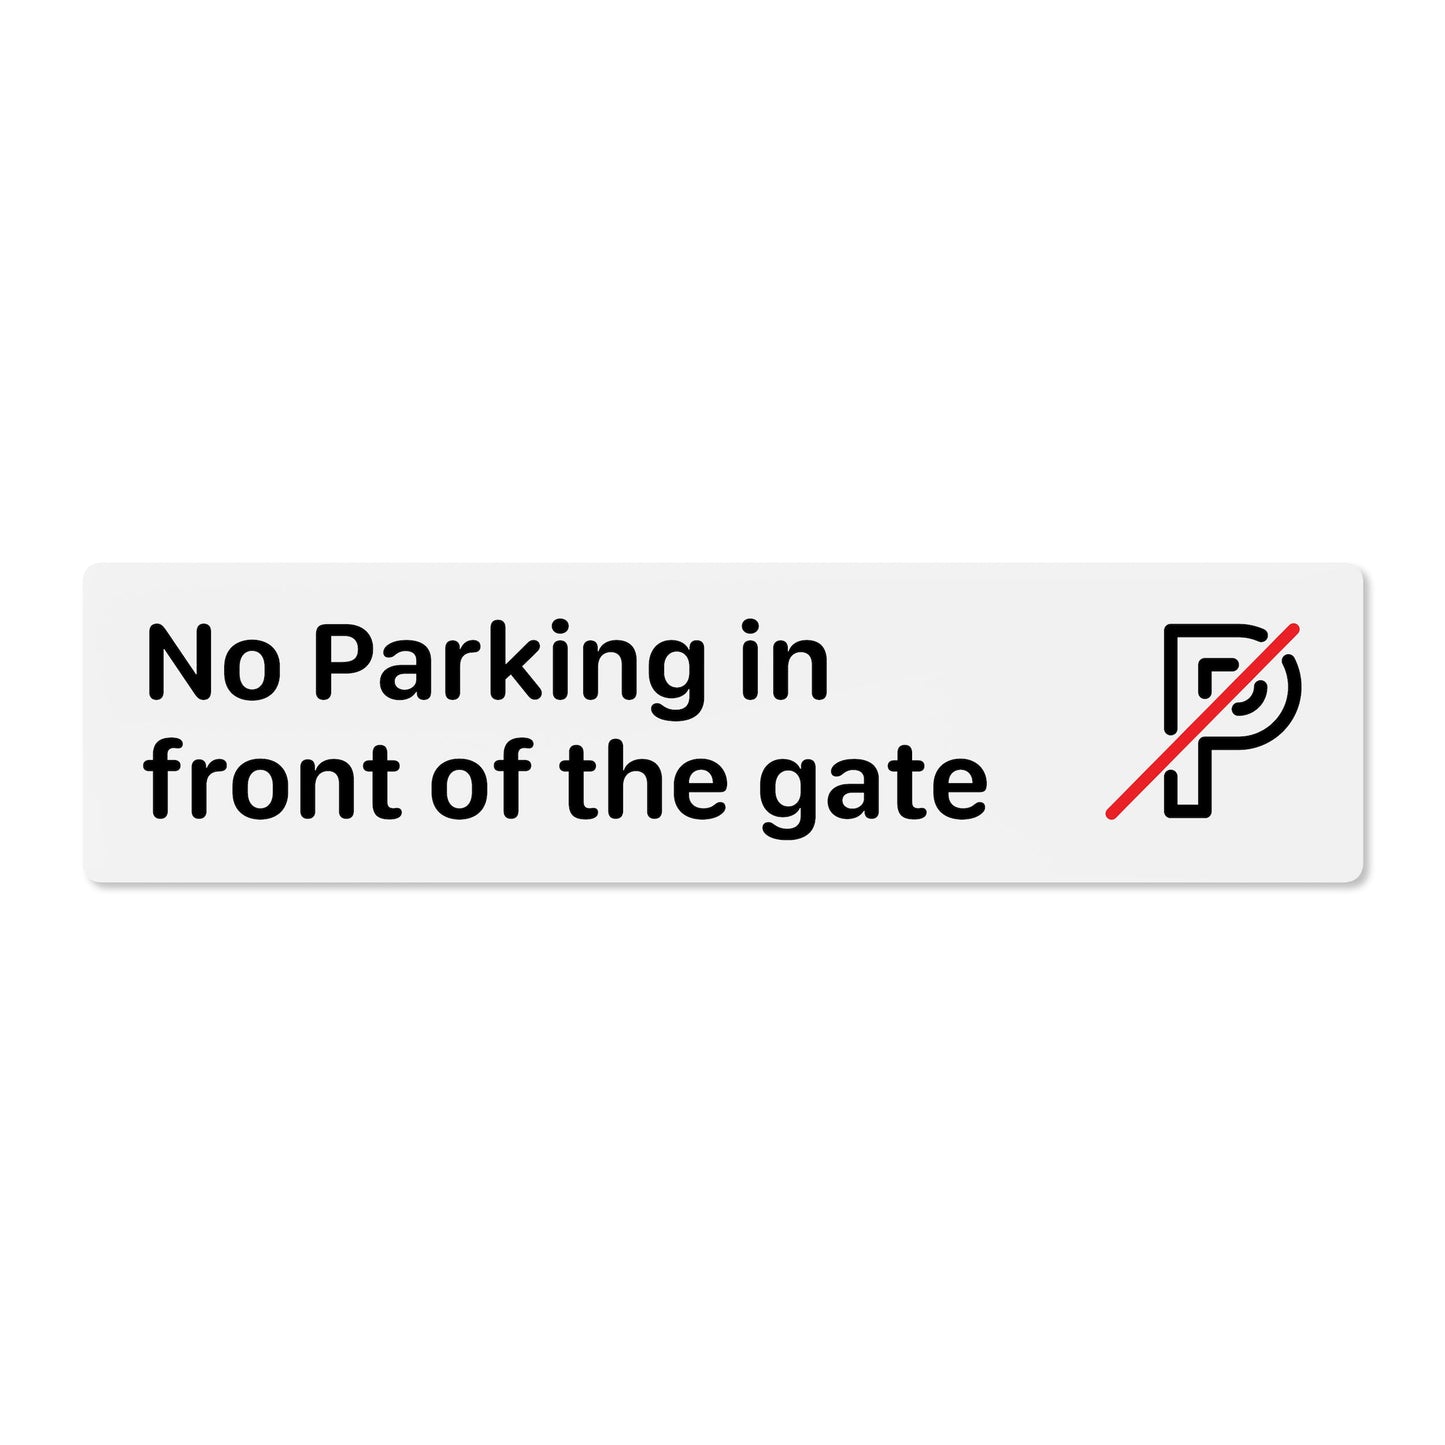 No Parking in front of the gate